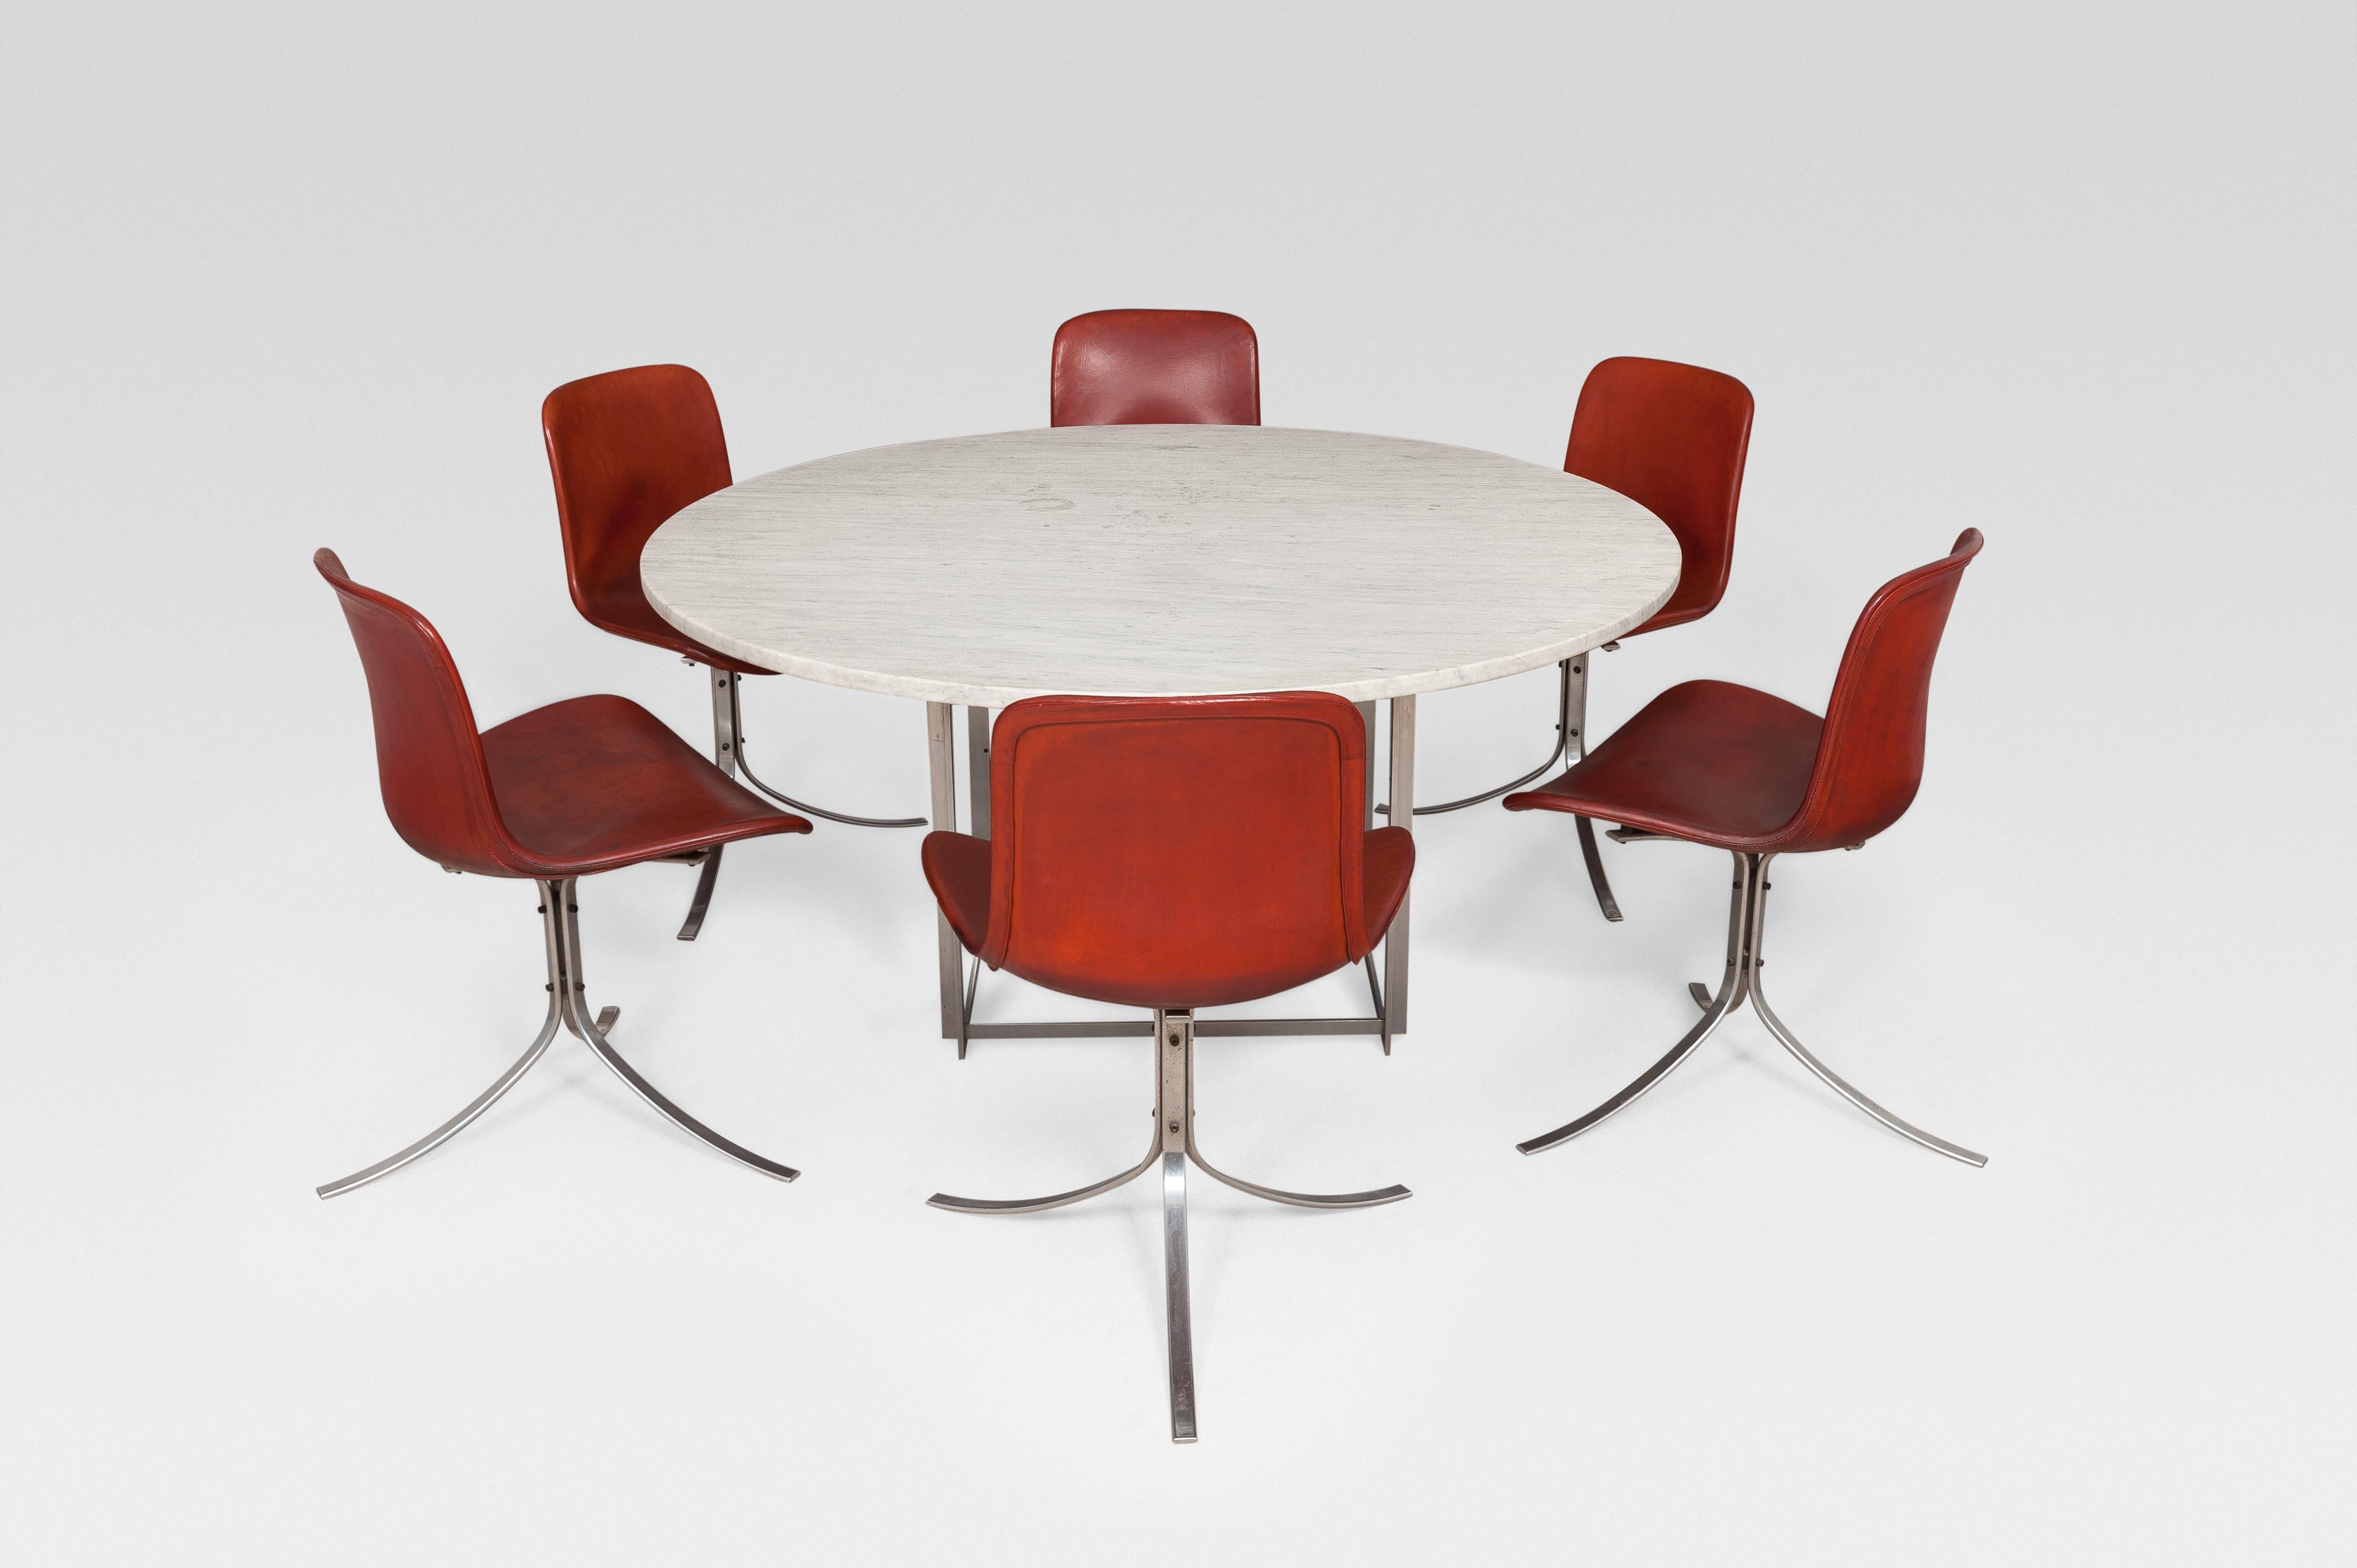 Table PK 54 by Poul Kjærholm. 
Made and stamped by Kold Christensen, 1963.
Brushed steel base and flint-rolled marble.